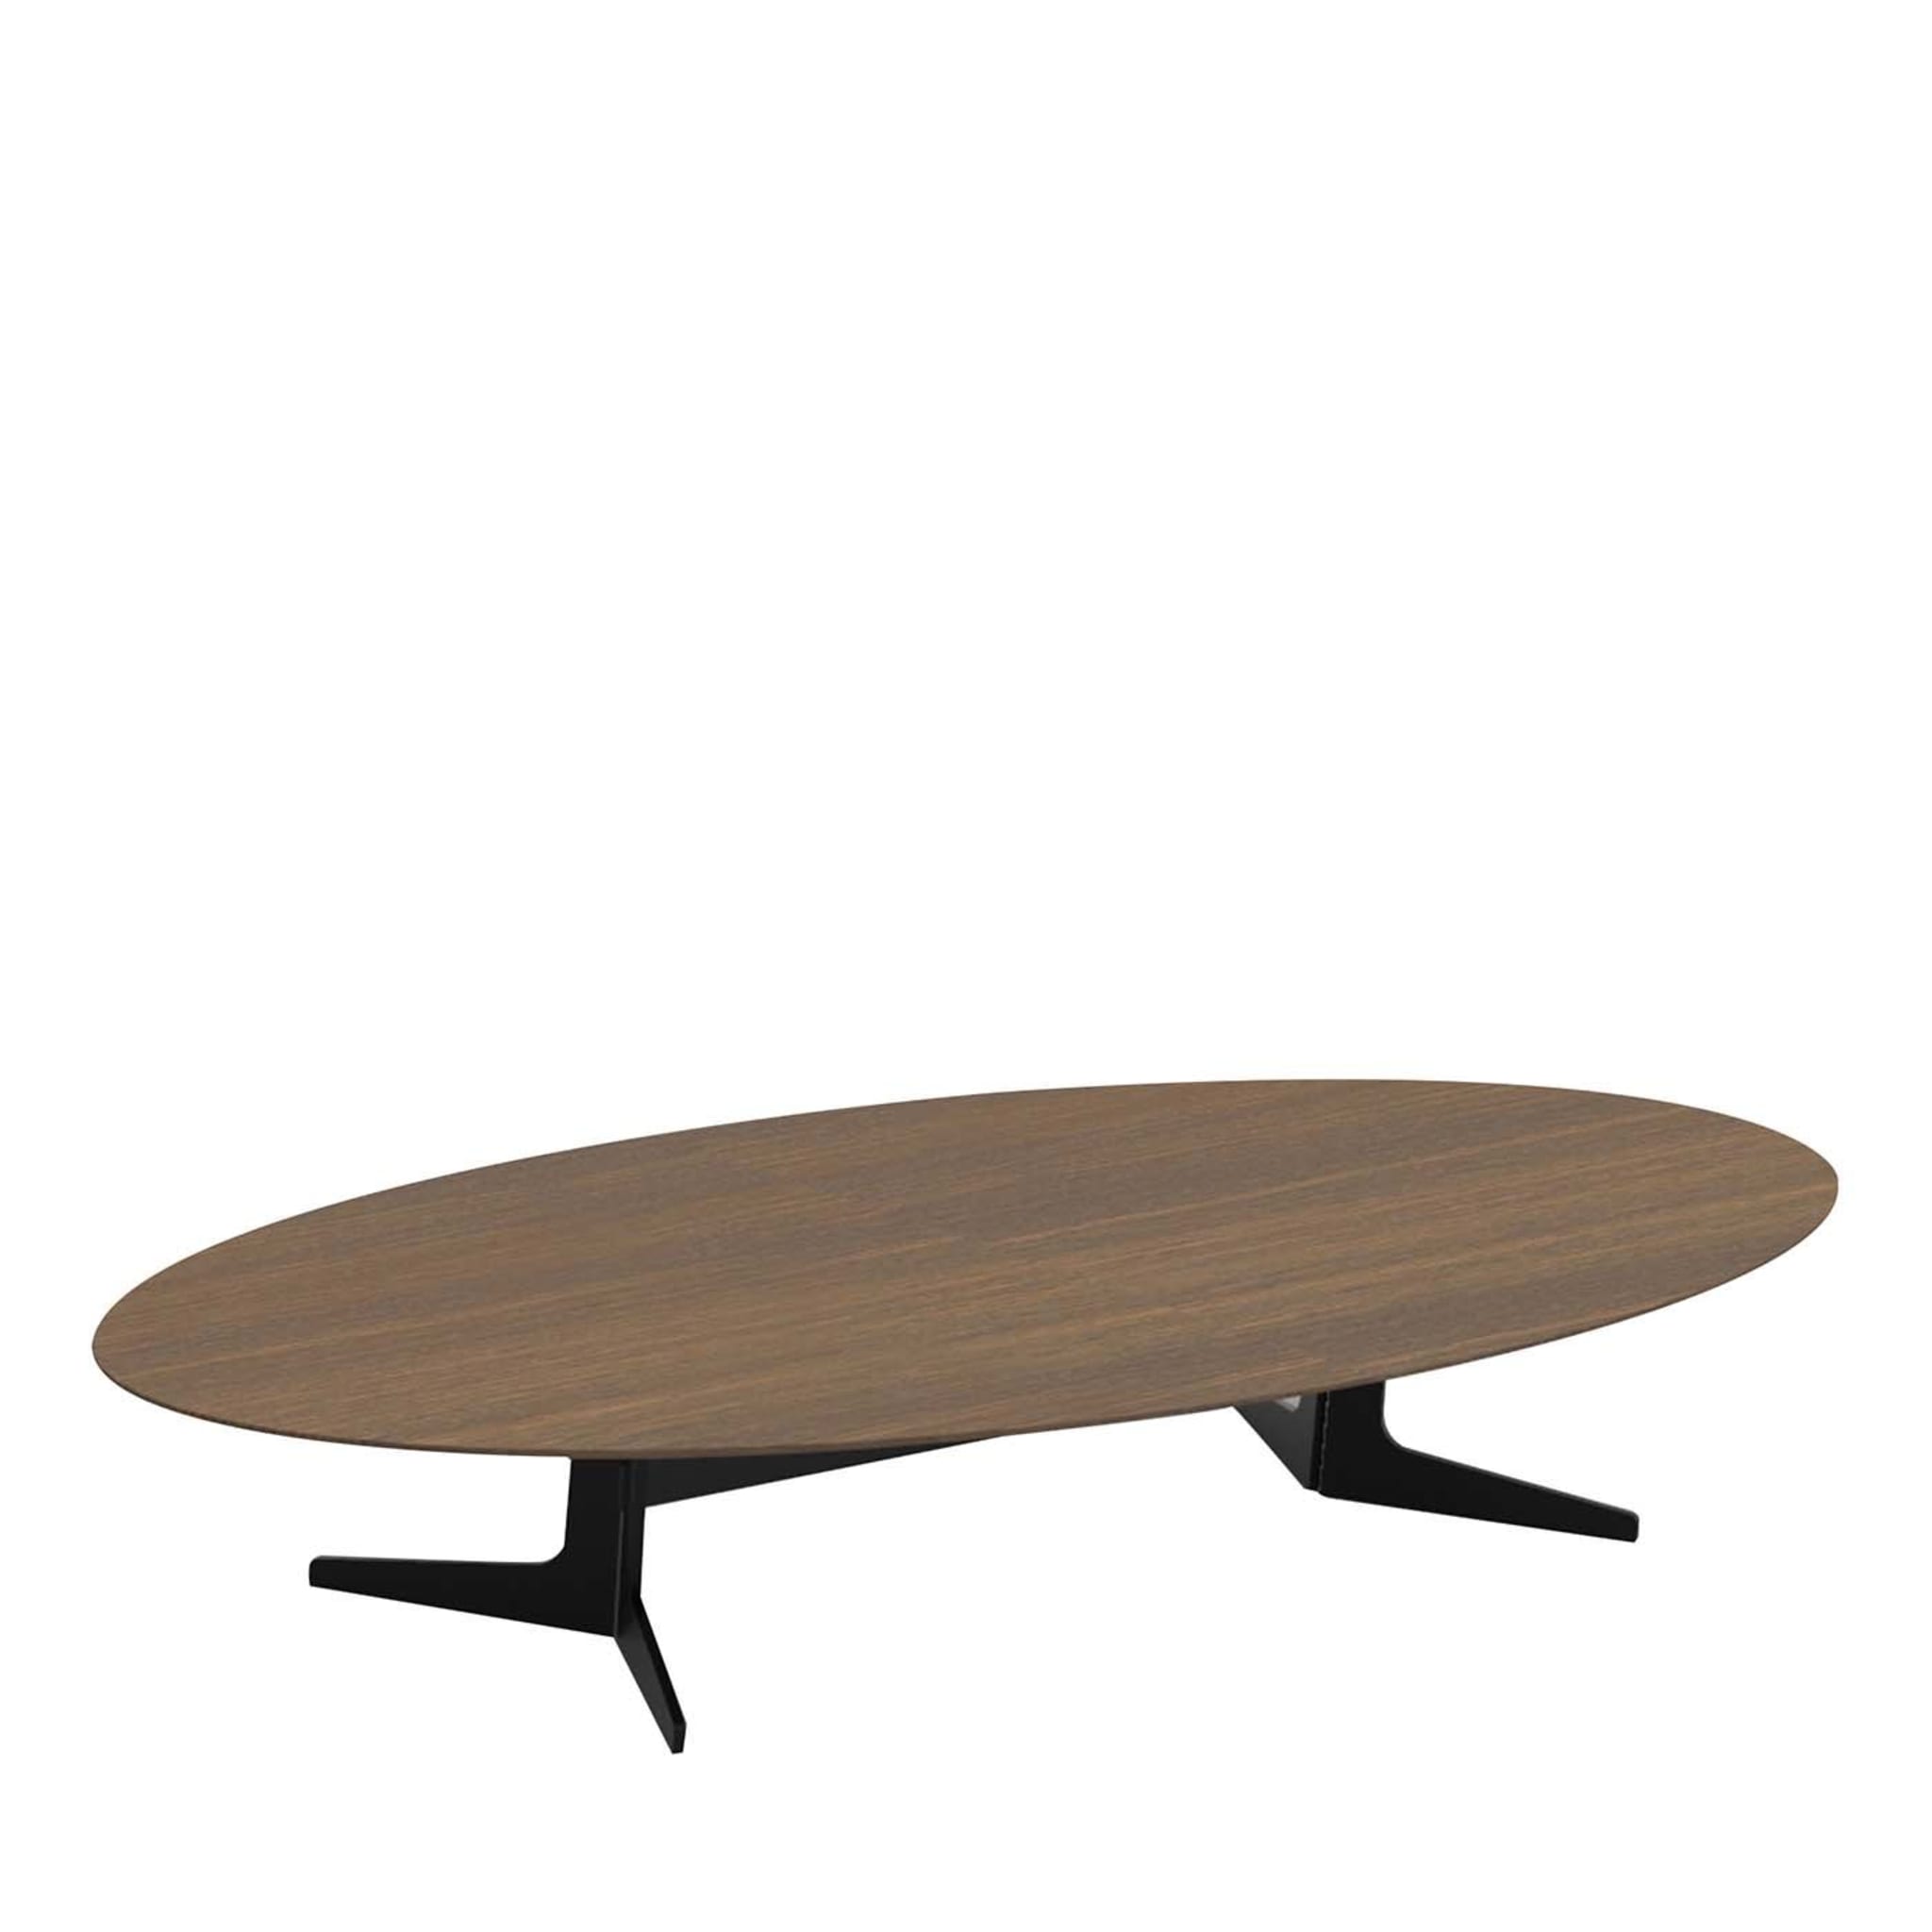 Blake Oval Coffee Table with Oak Wood Top - Main view